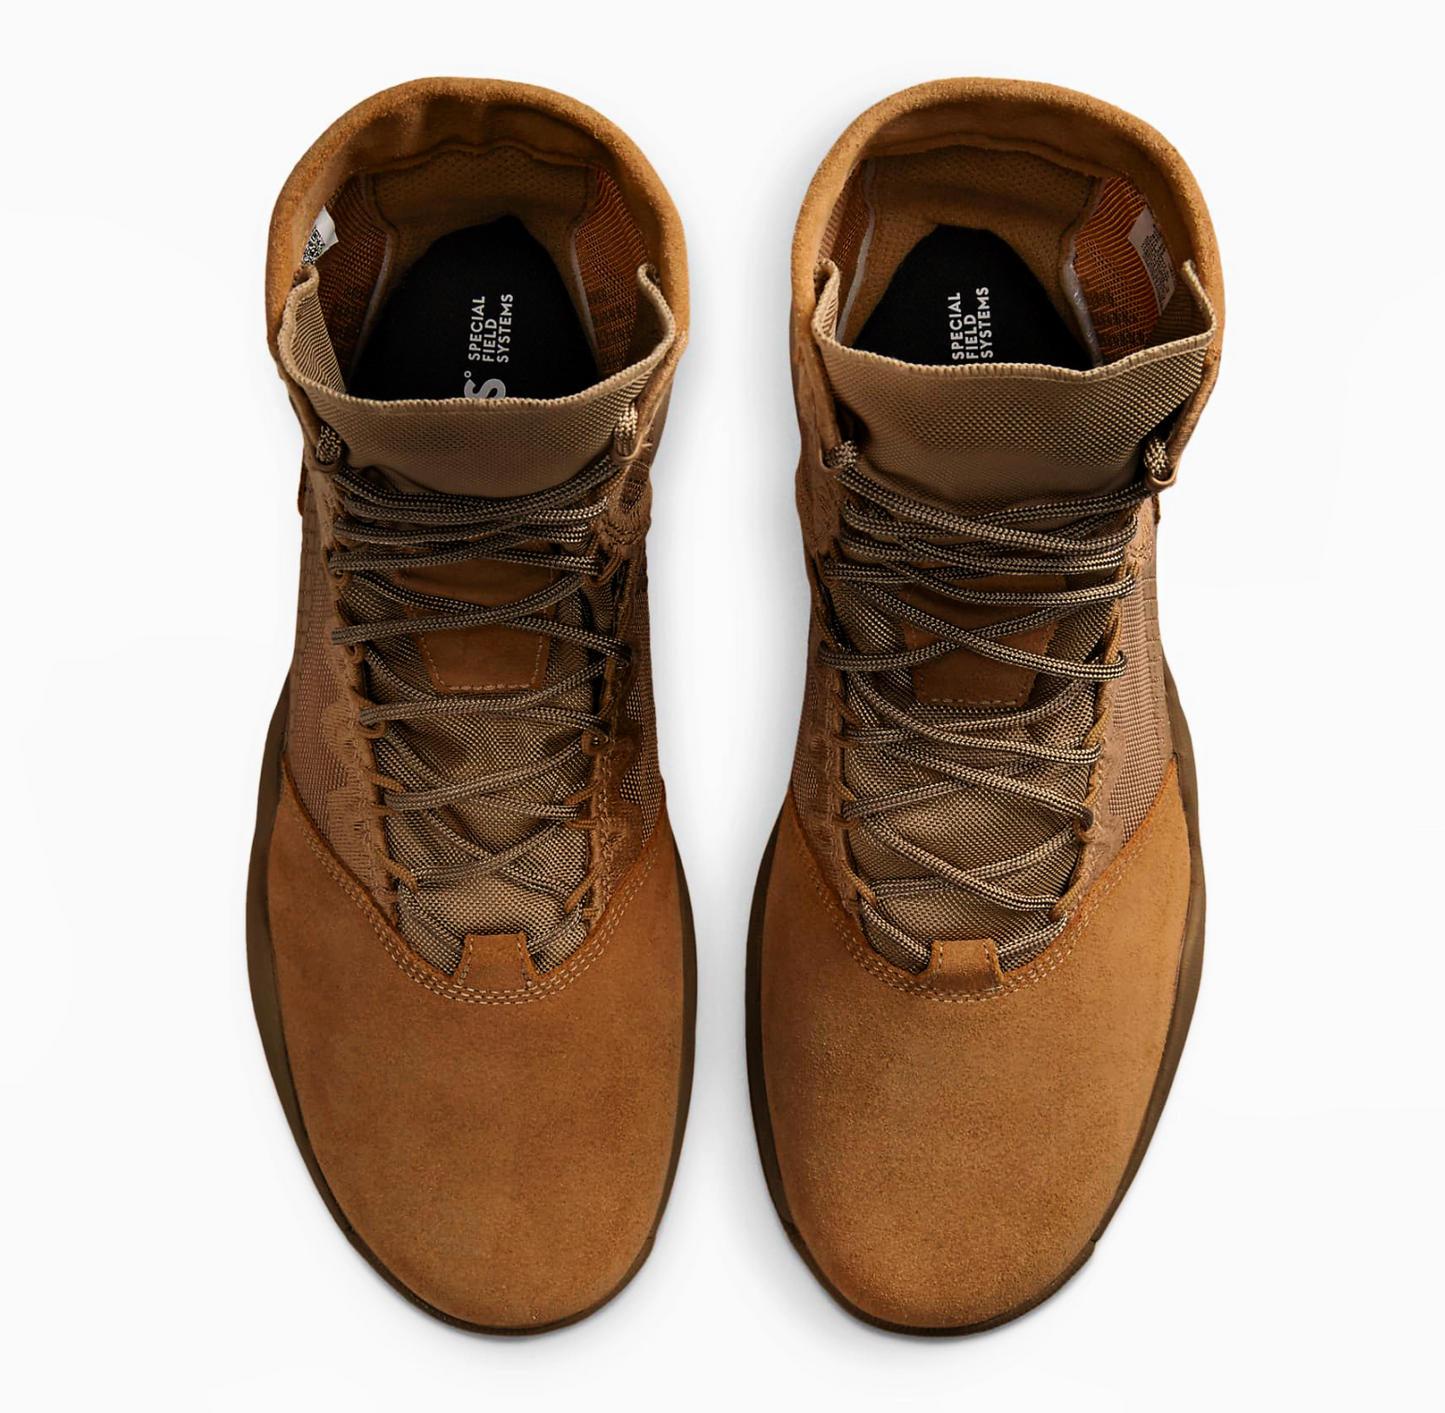 Nike SFB B1 Coyote Brown Leather Military Boots